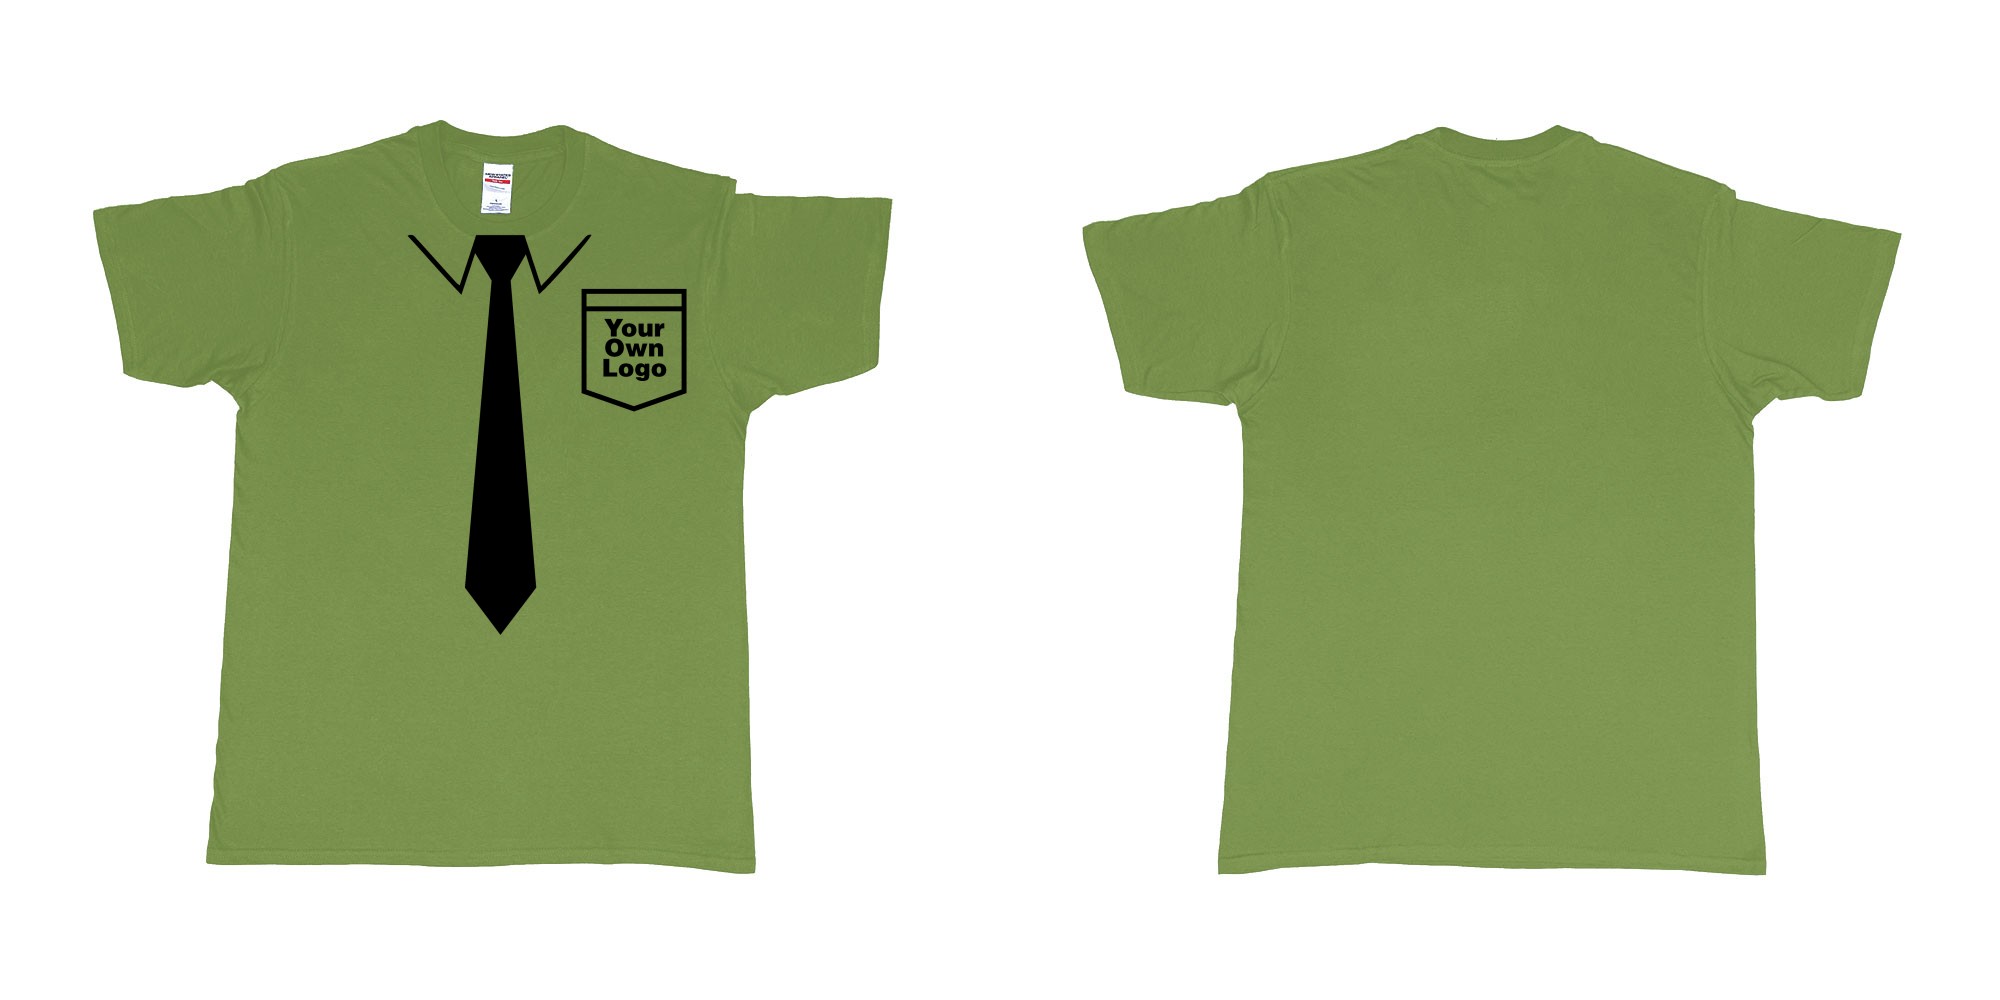 Custom tshirt design staff uniform with tie pocket own logo bali in fabric color military-green choice your own text made in Bali by The Pirate Way